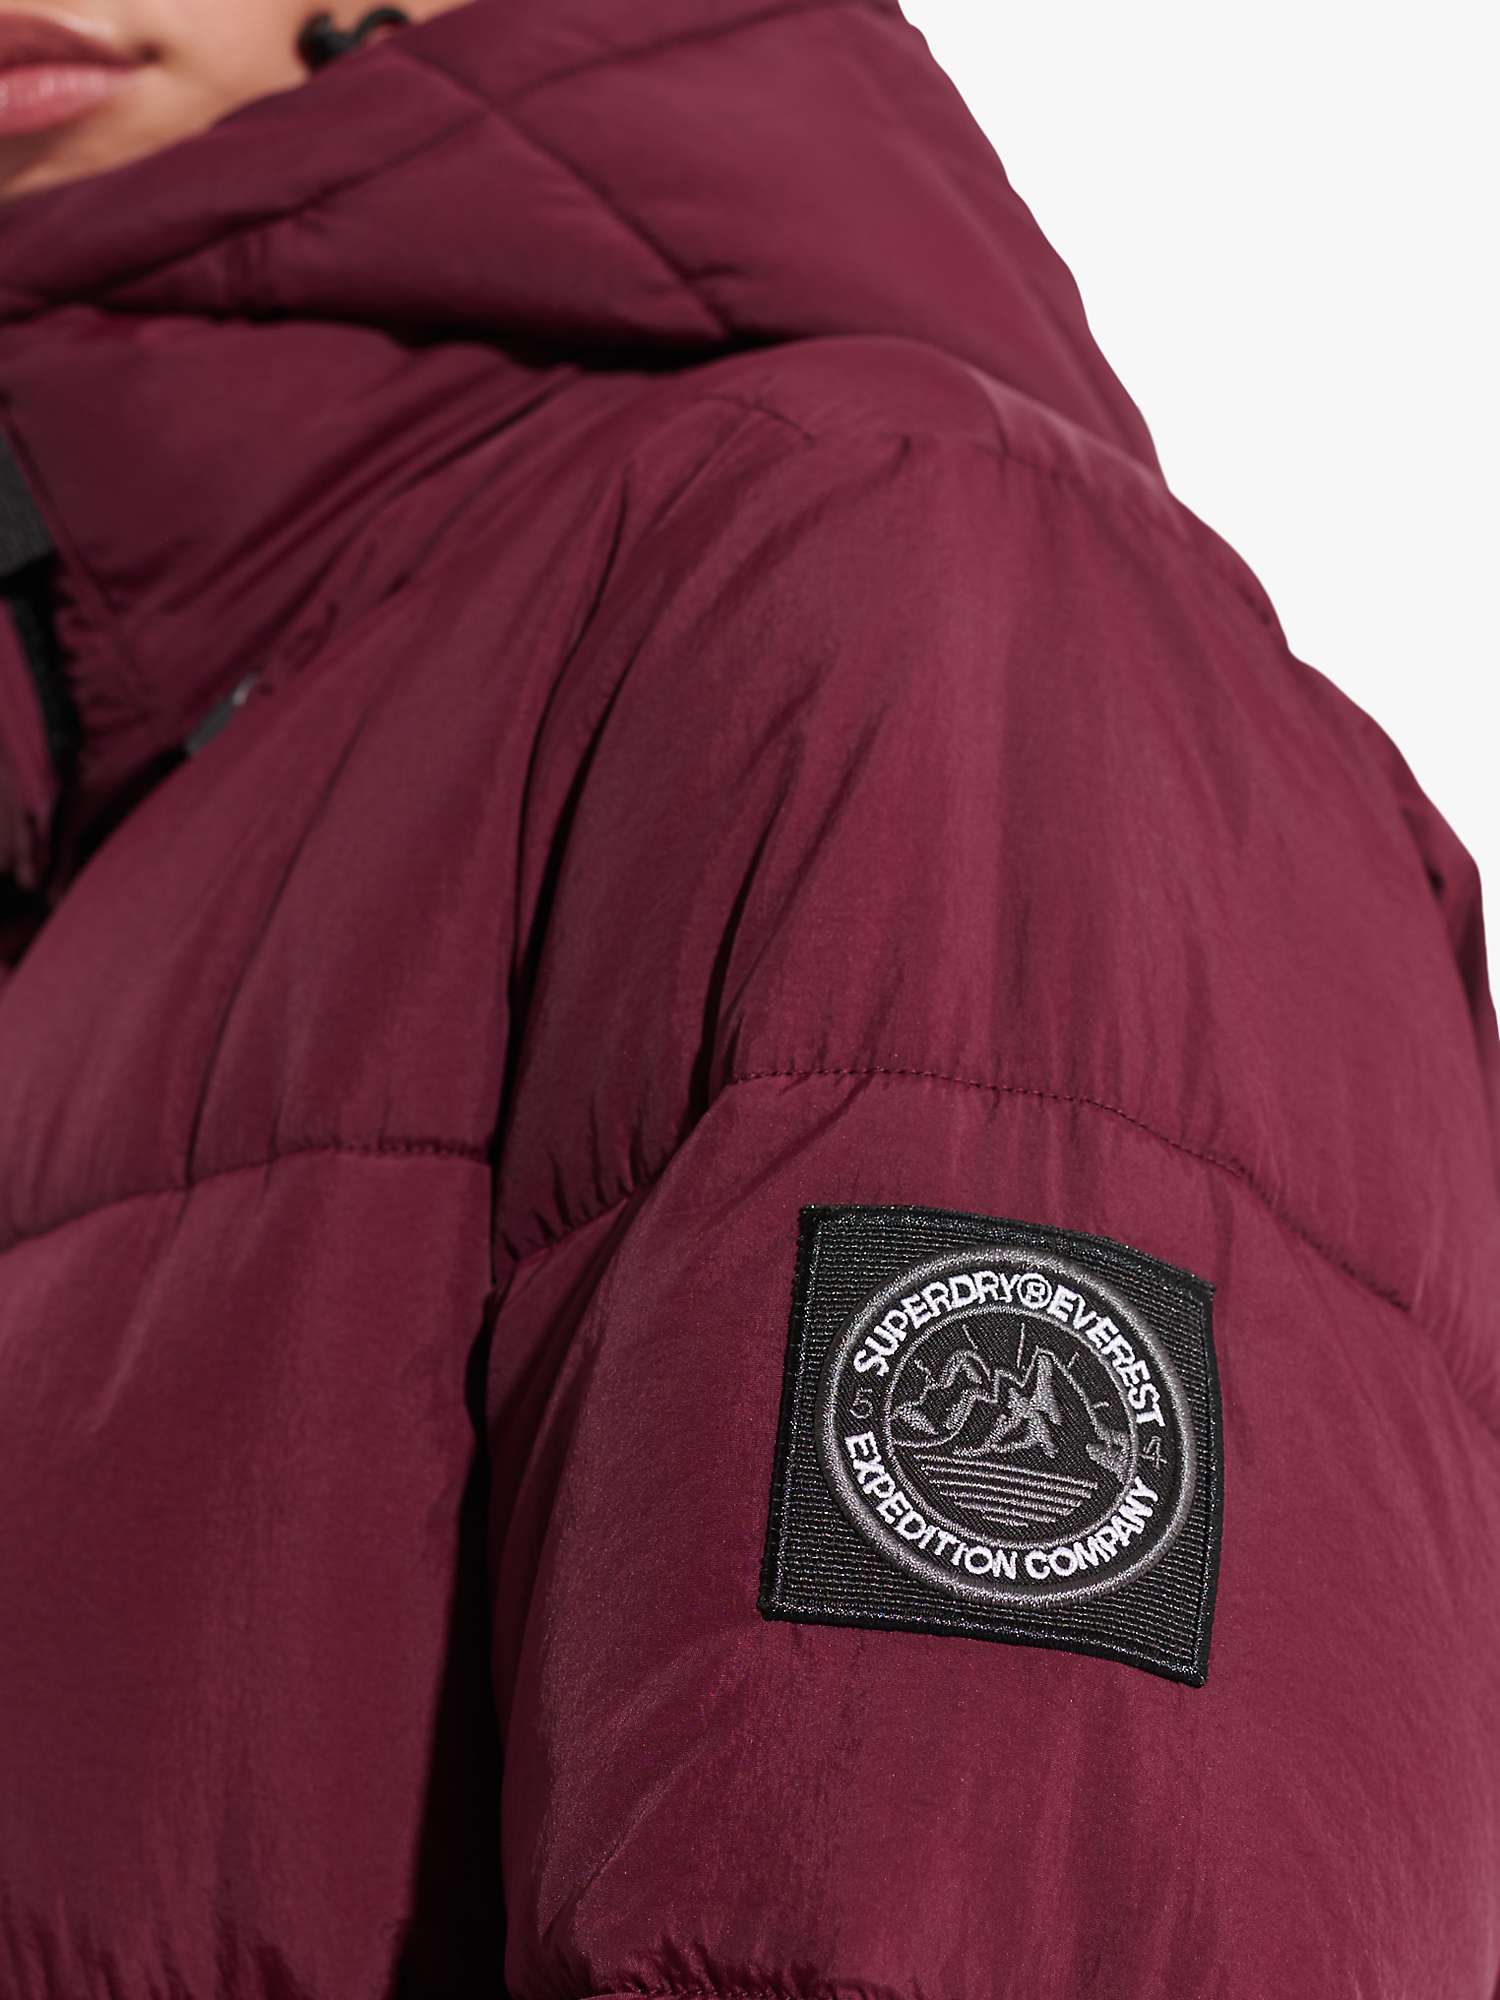 Superdry Expedition Cocoon Padded Coat, Port at John Lewis & Partners